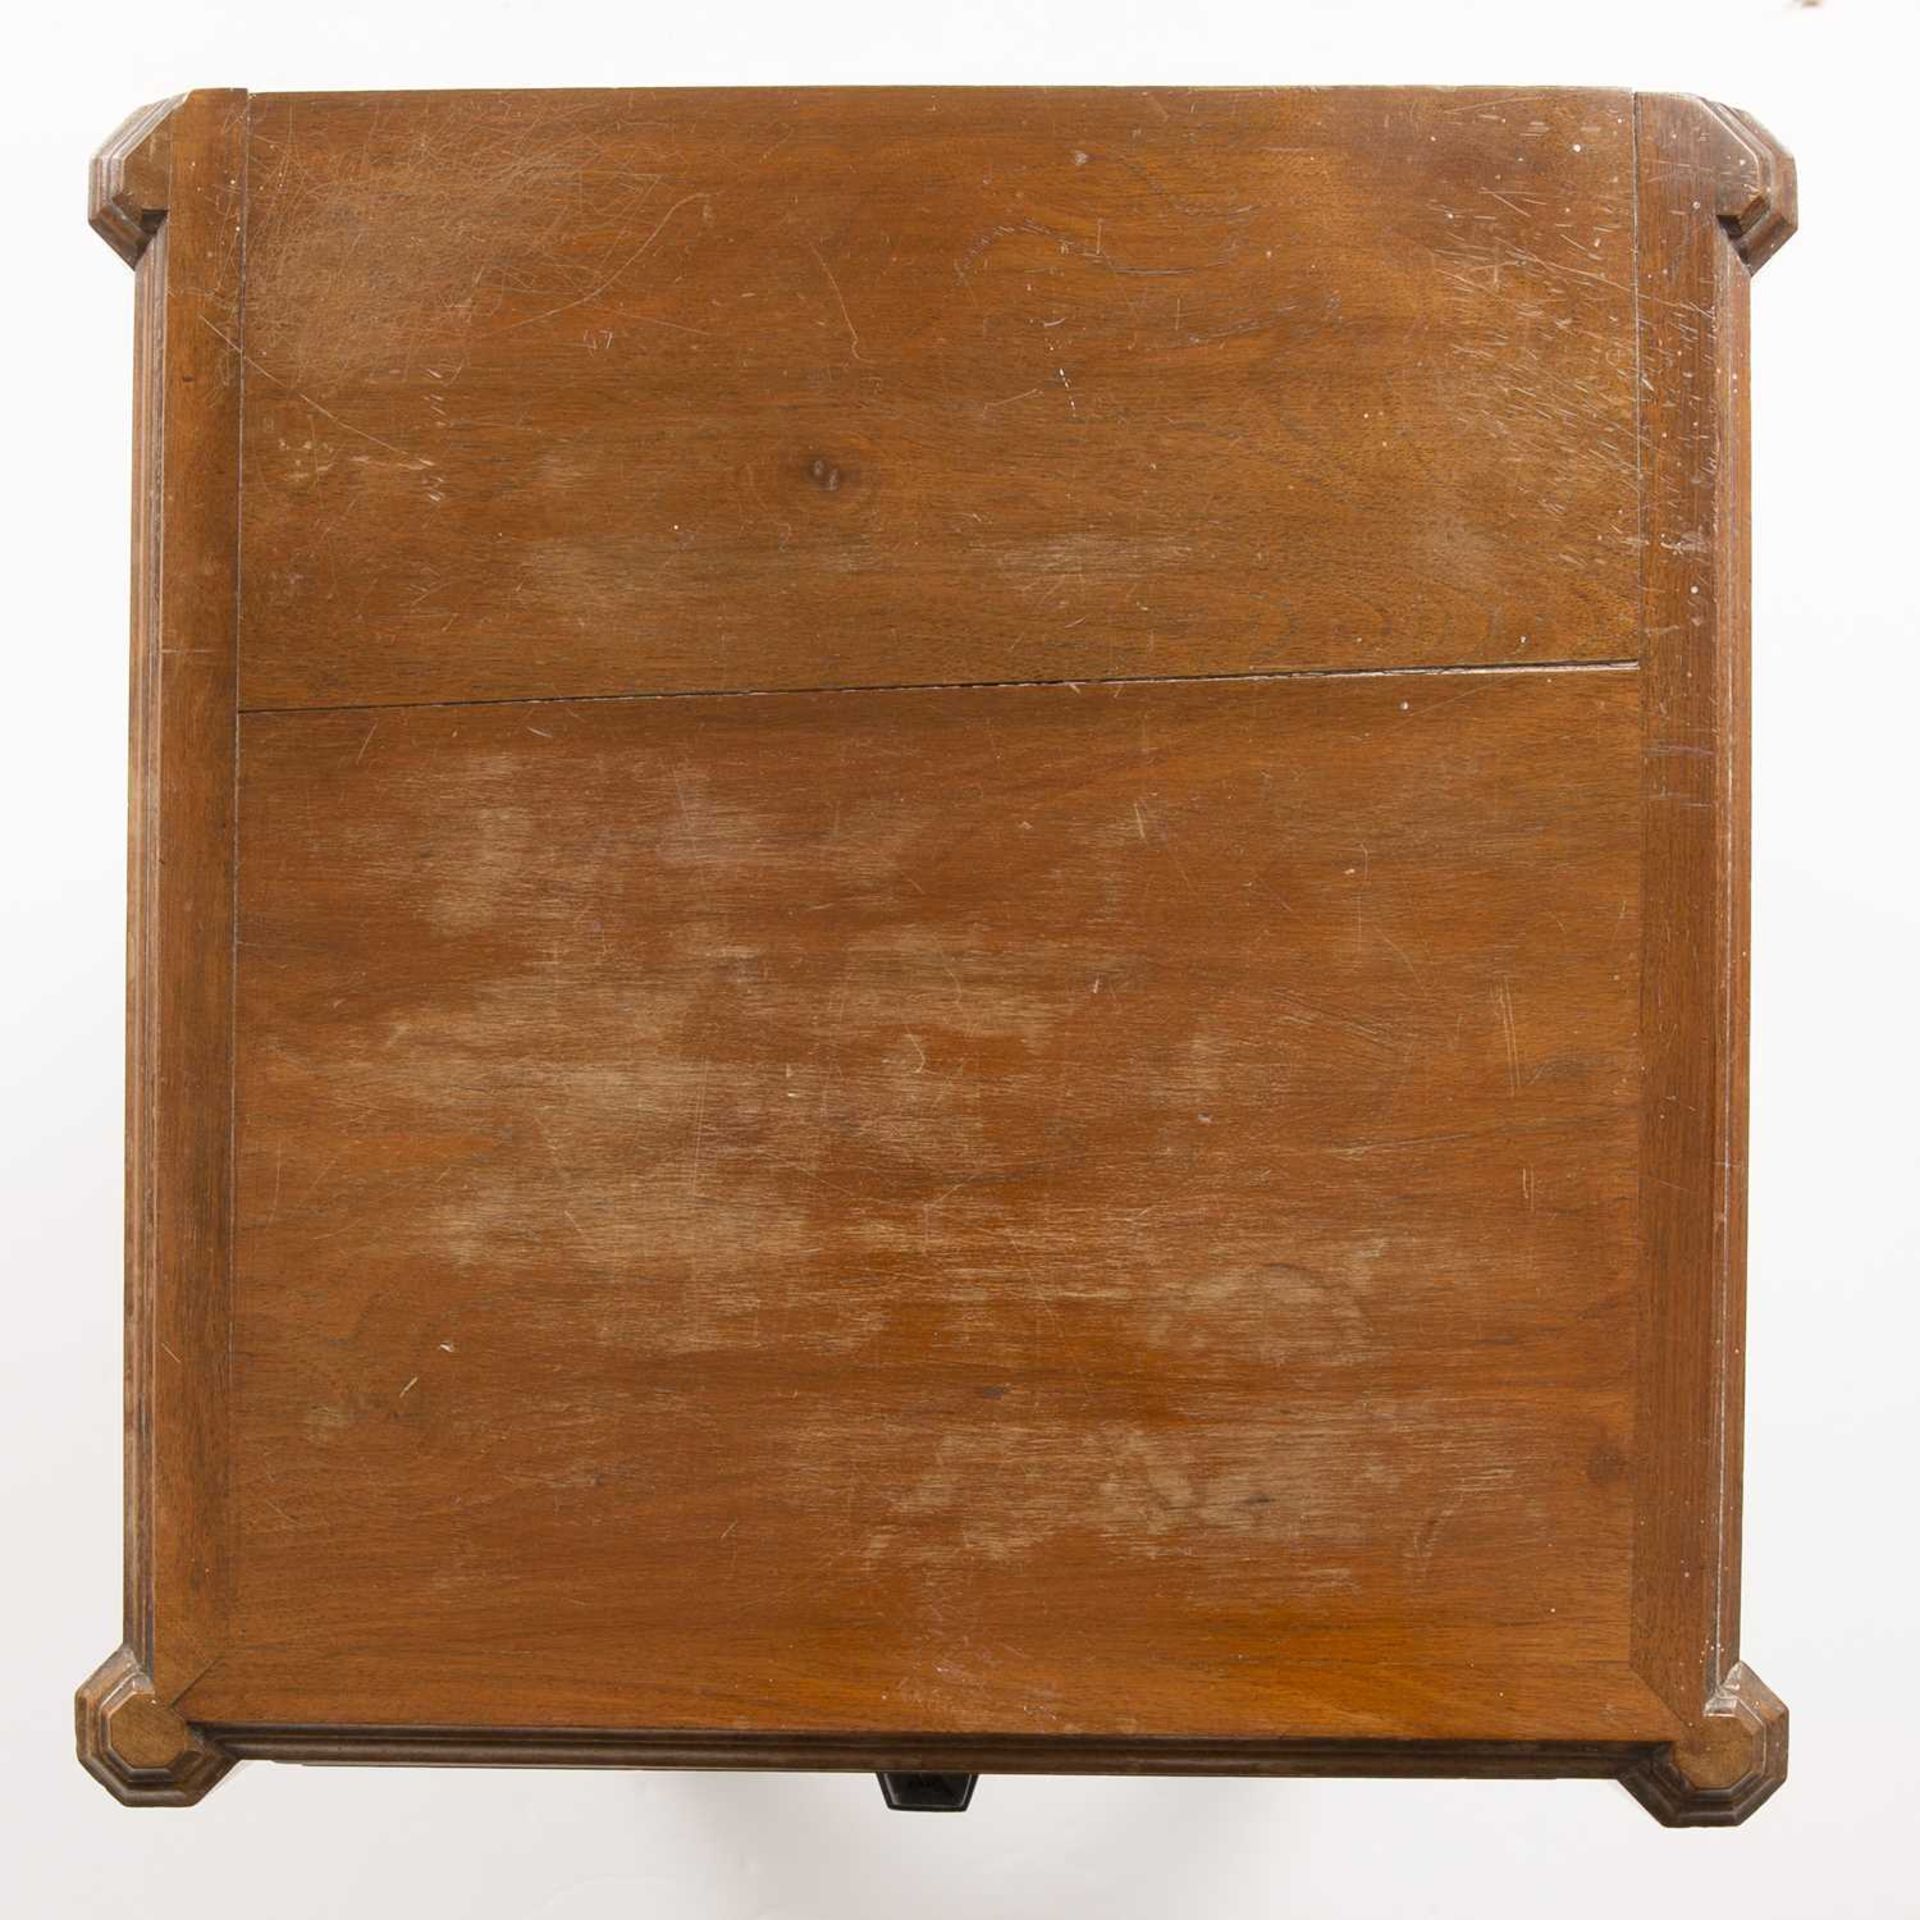 Gordon Russell (1892-1980) Bedside cabinet walnut, with two drawers with ebony handles above - Image 5 of 6